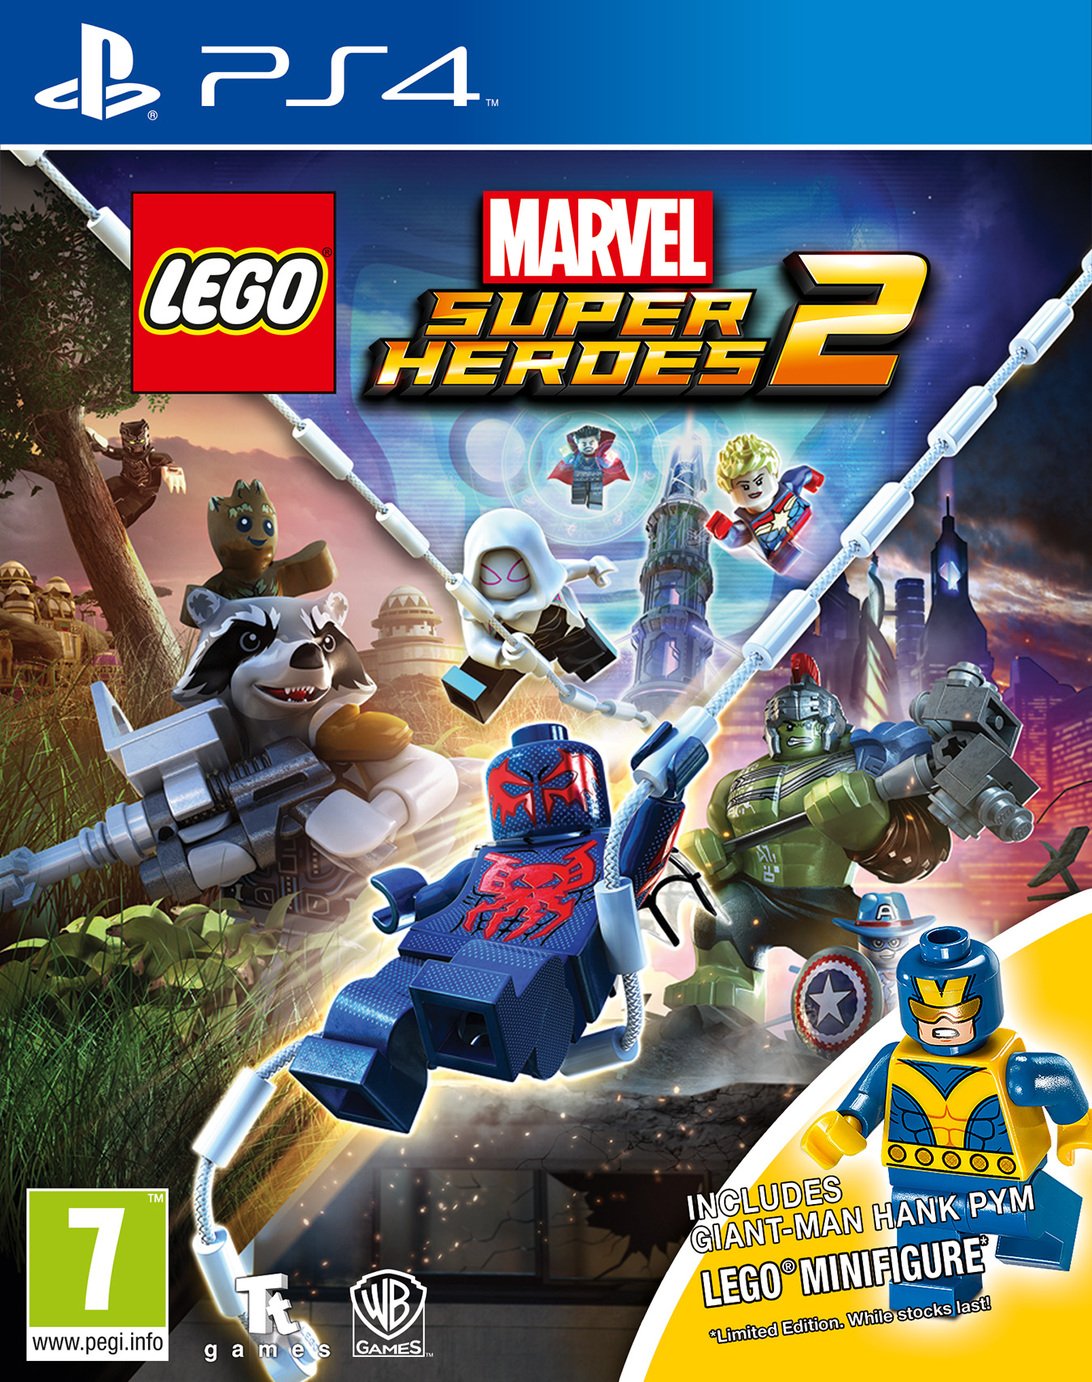 lego-marvel-super-heroes-2-ps4-game-with-minifig-7547298-argos-price-tracker-pricehistory